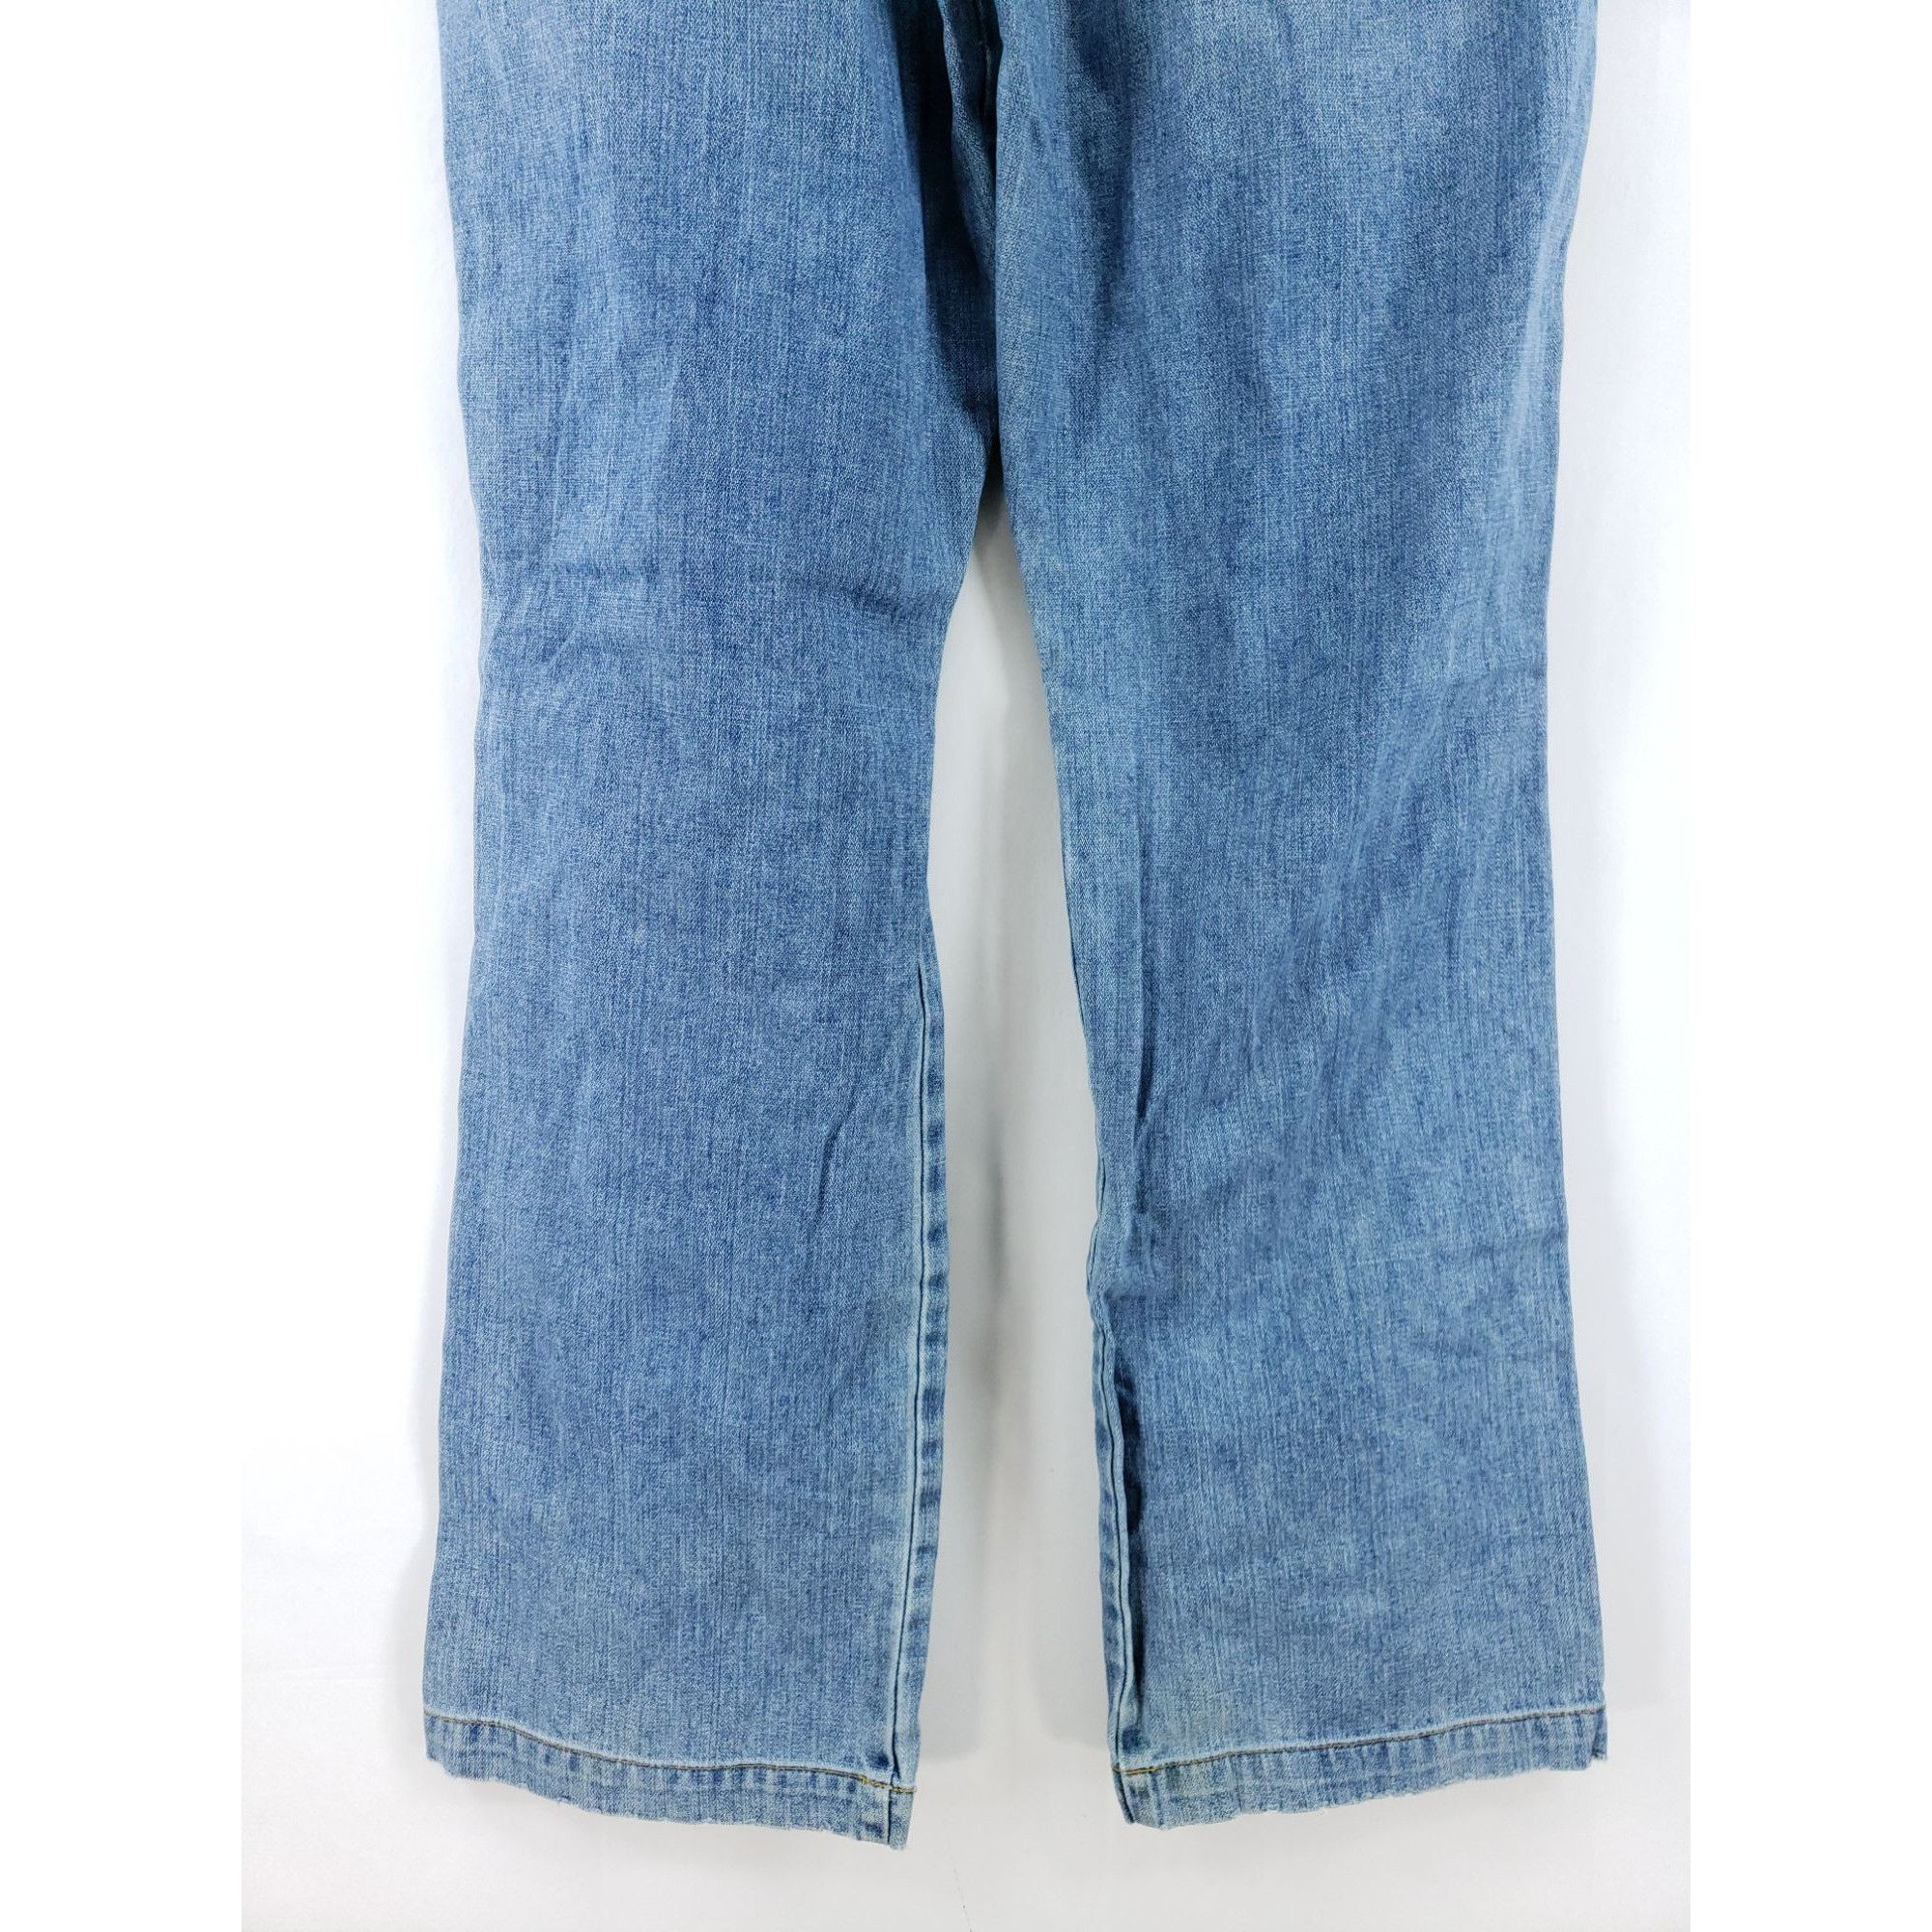 Cinch Cinch Relaxed Fit Jeans Men's Size 34/36 Distressed Light Size US 34 / EU 50 - 3 Thumbnail